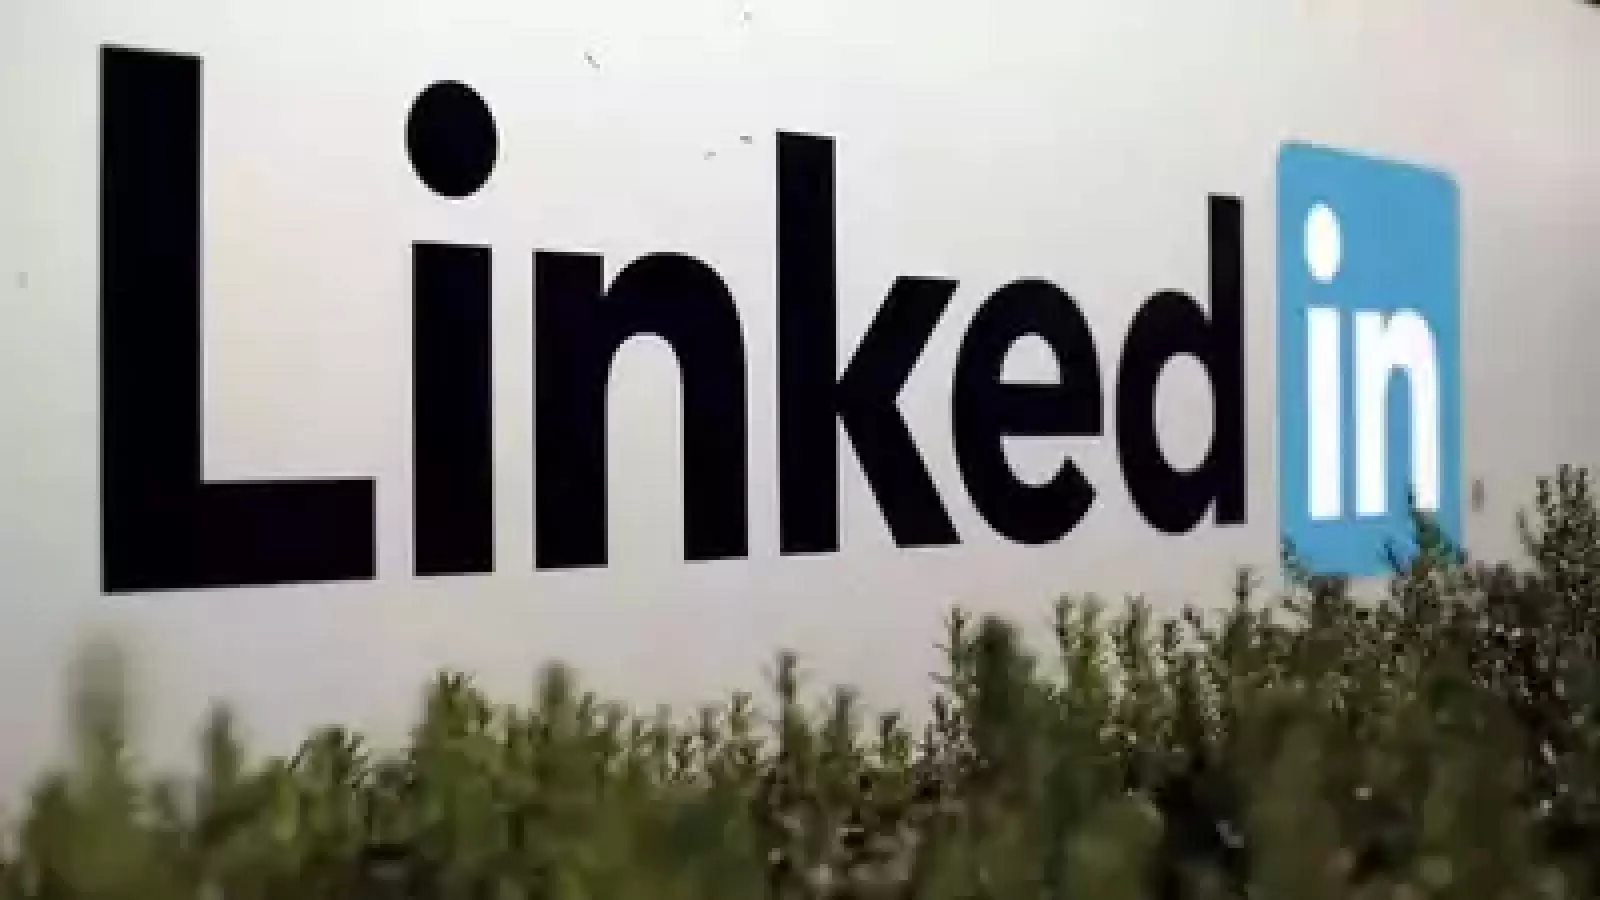 LinkedIn will soon launch a new feature that allows you to watch videos, just like on YouTube and Instagram